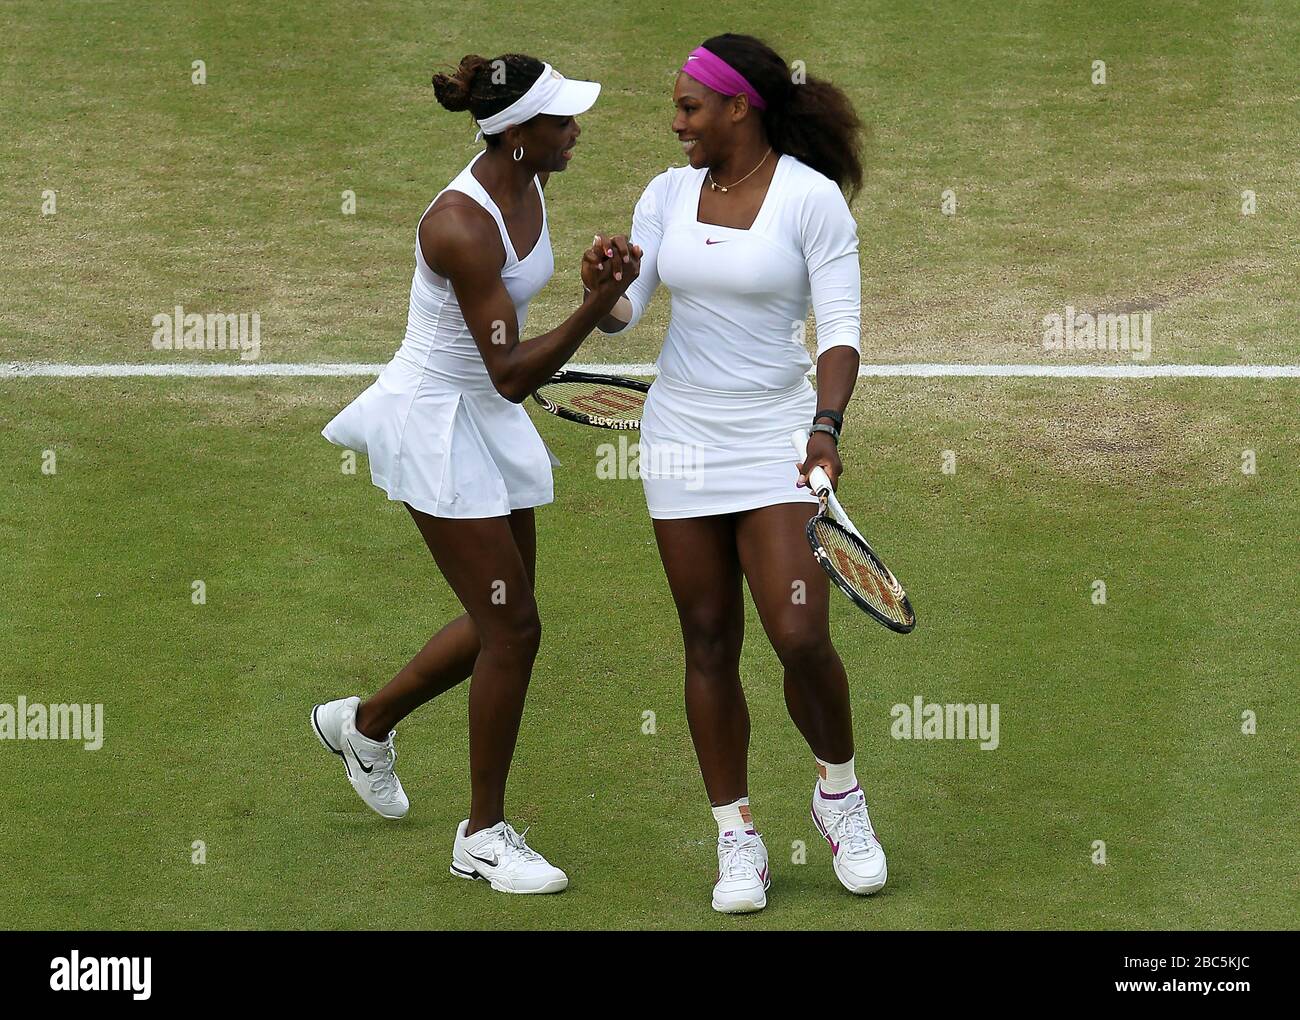 The USA's Venus (left) and Serena Williams celebrate their win over the USA's Liezel Huber and Lisa Raymond in the womens doubles Stock Photo